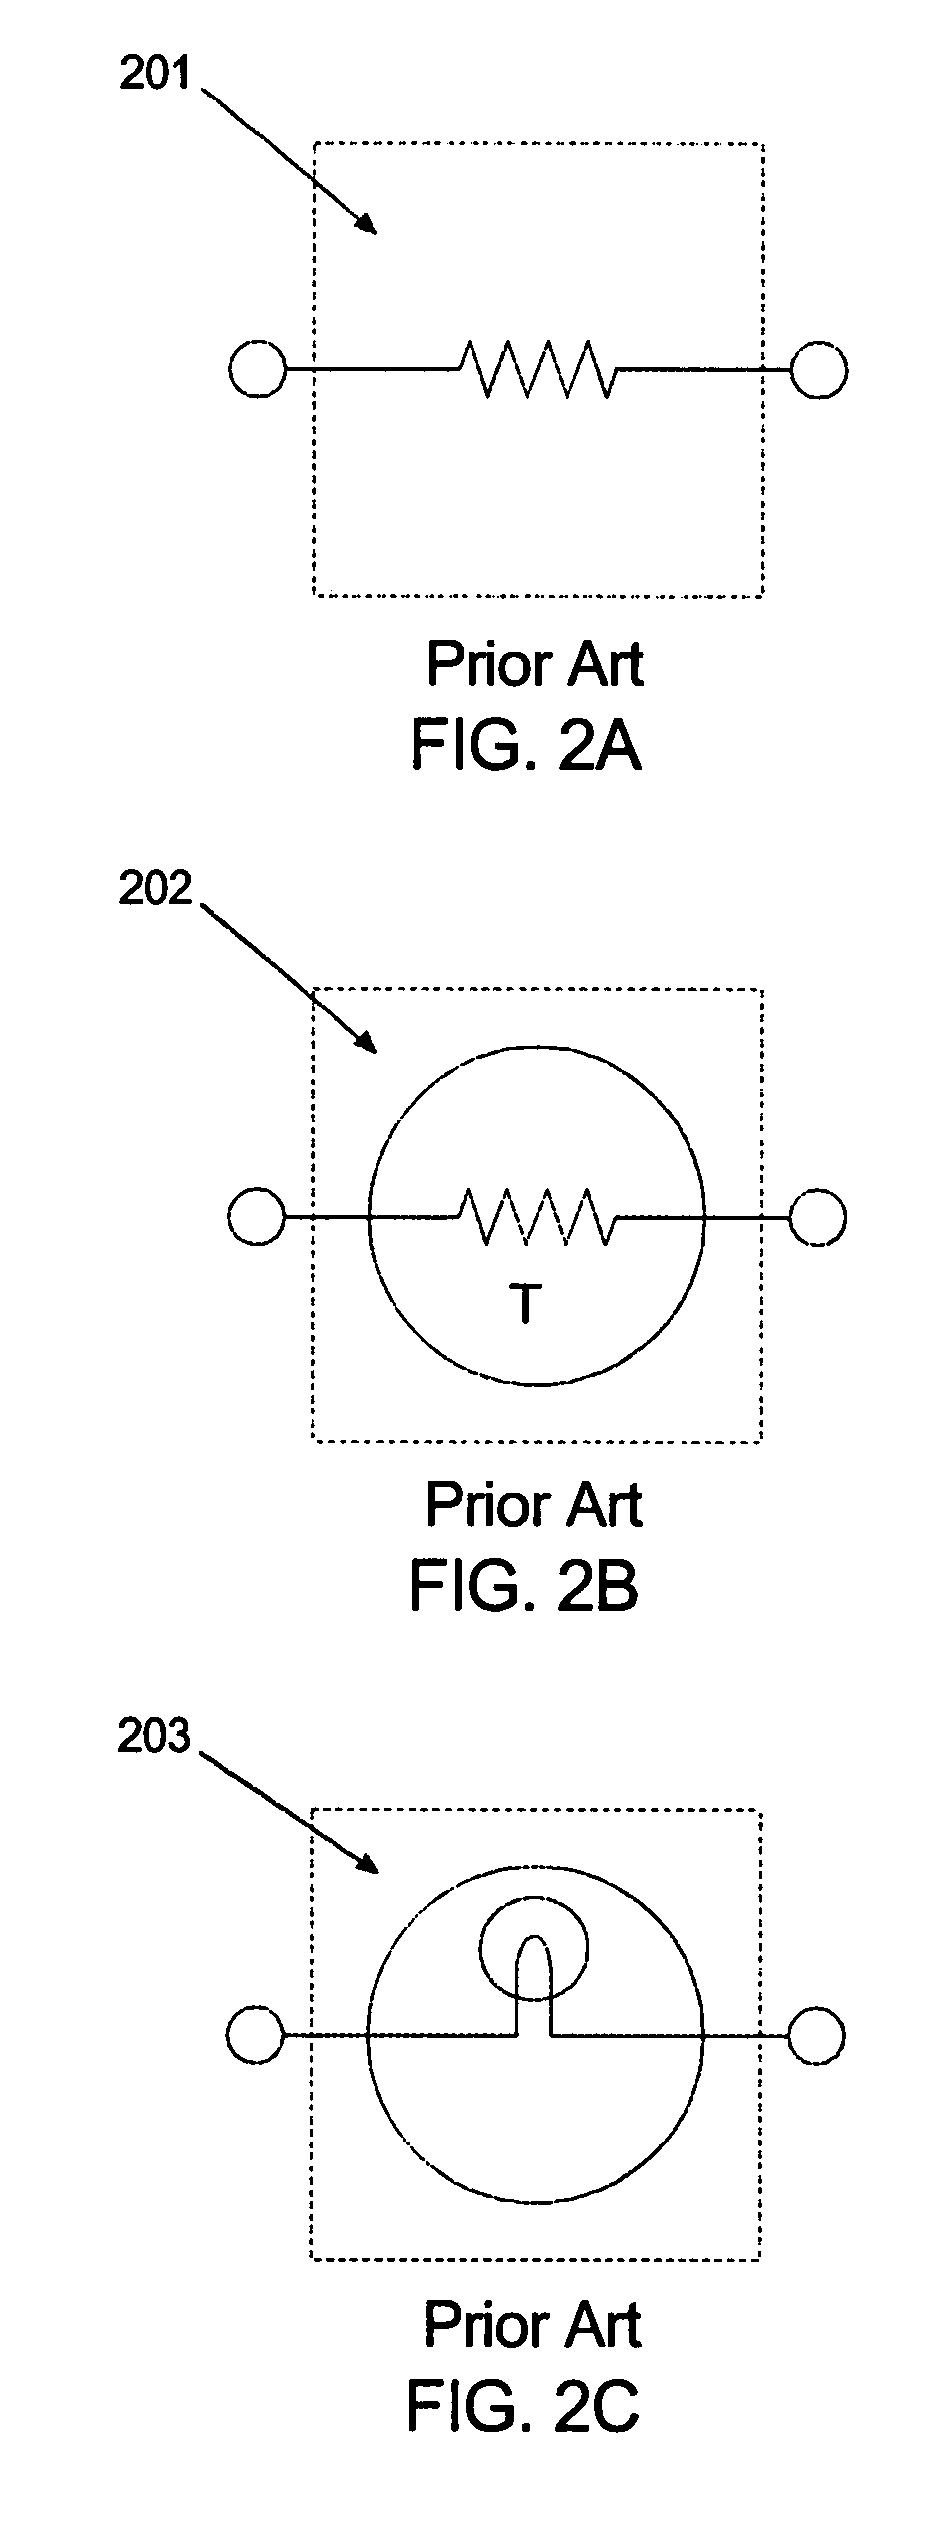 High-voltage low-distortion input protection current limiter